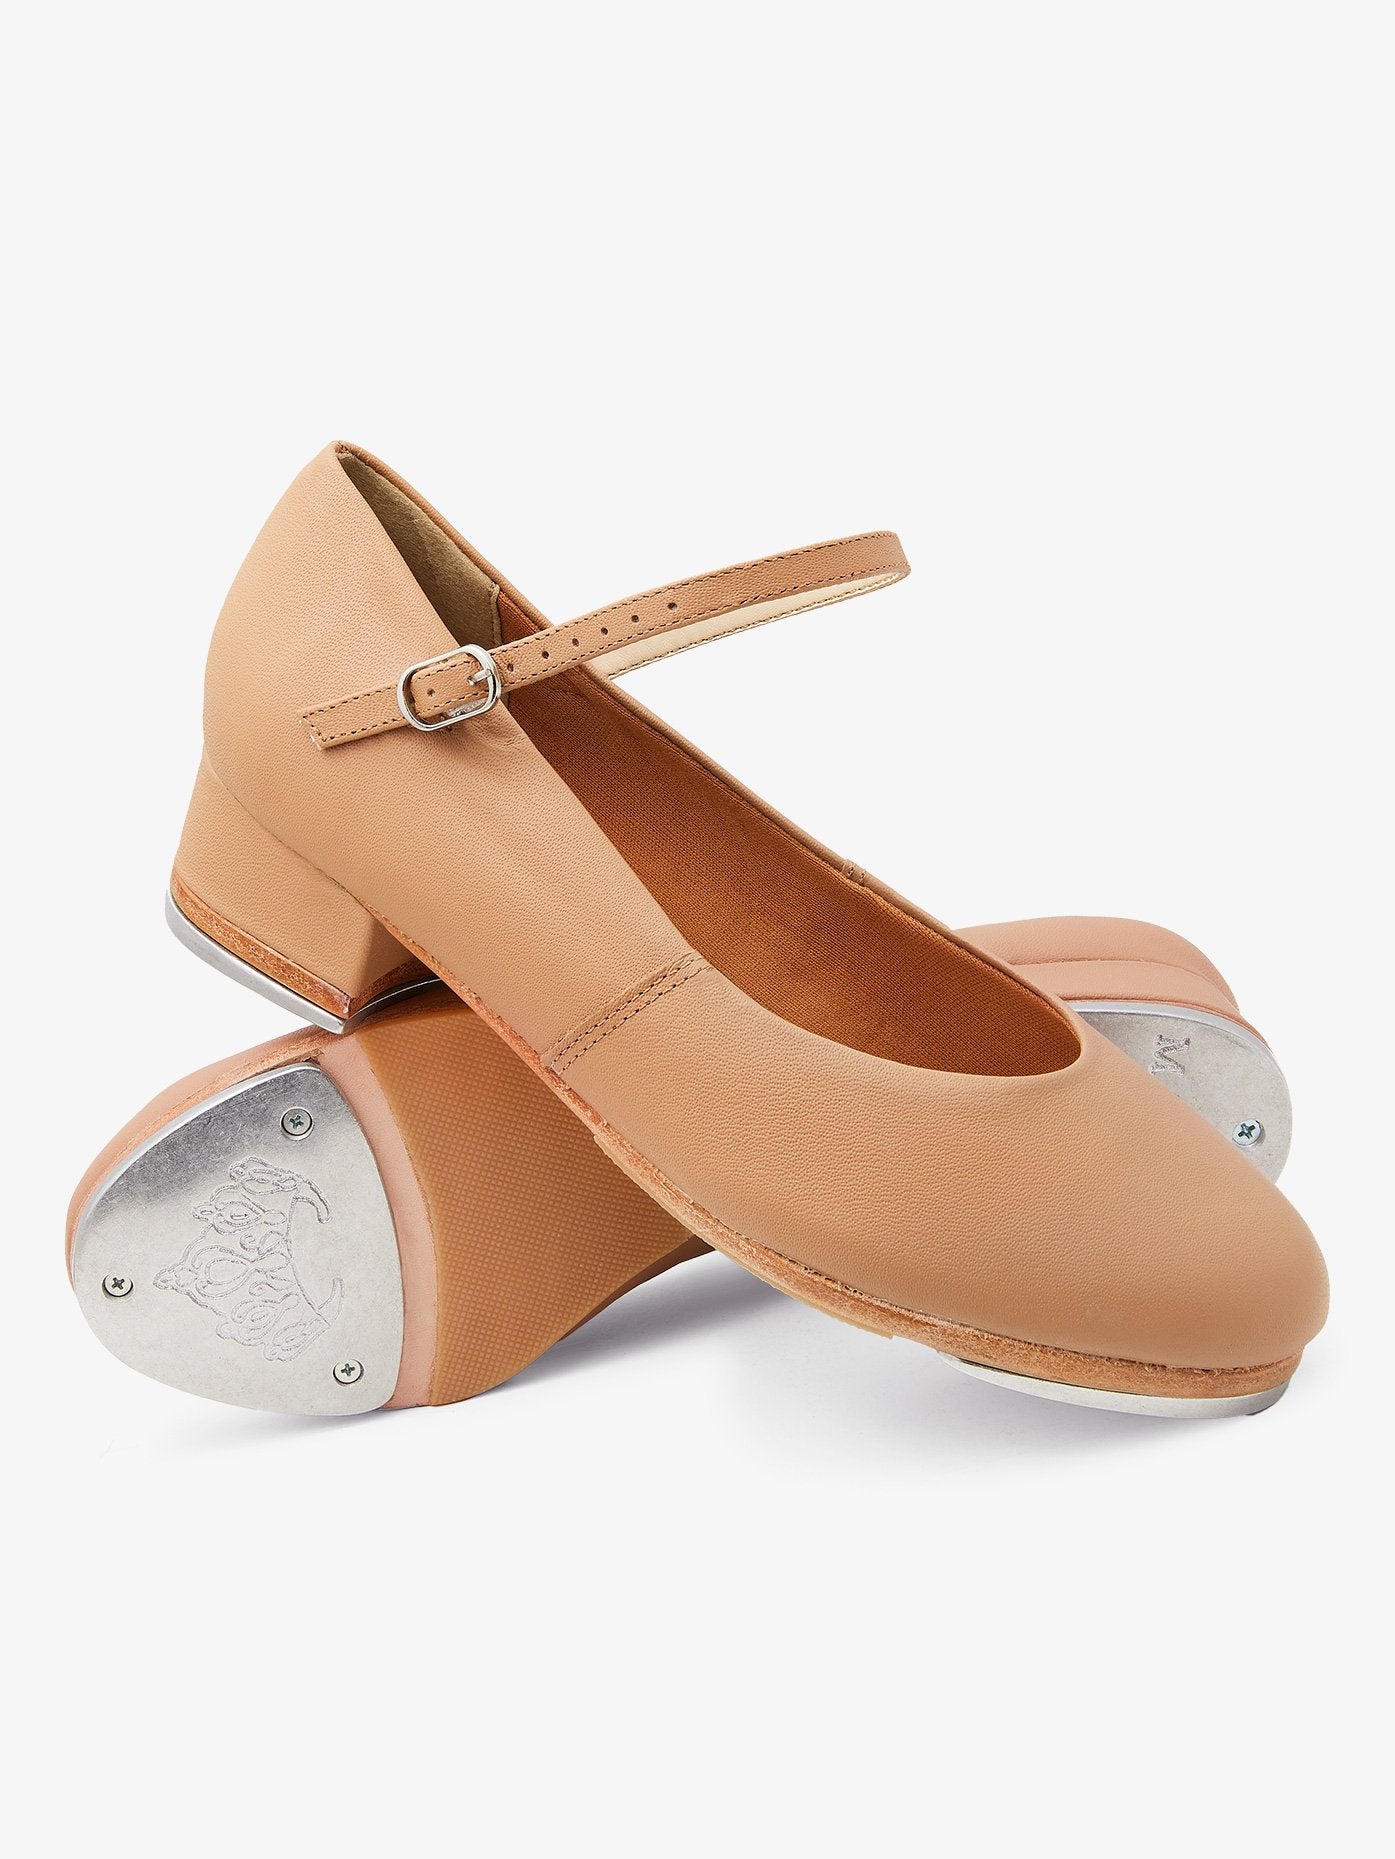 Women's soft leather Mary Jane buckle tan tap shoes 